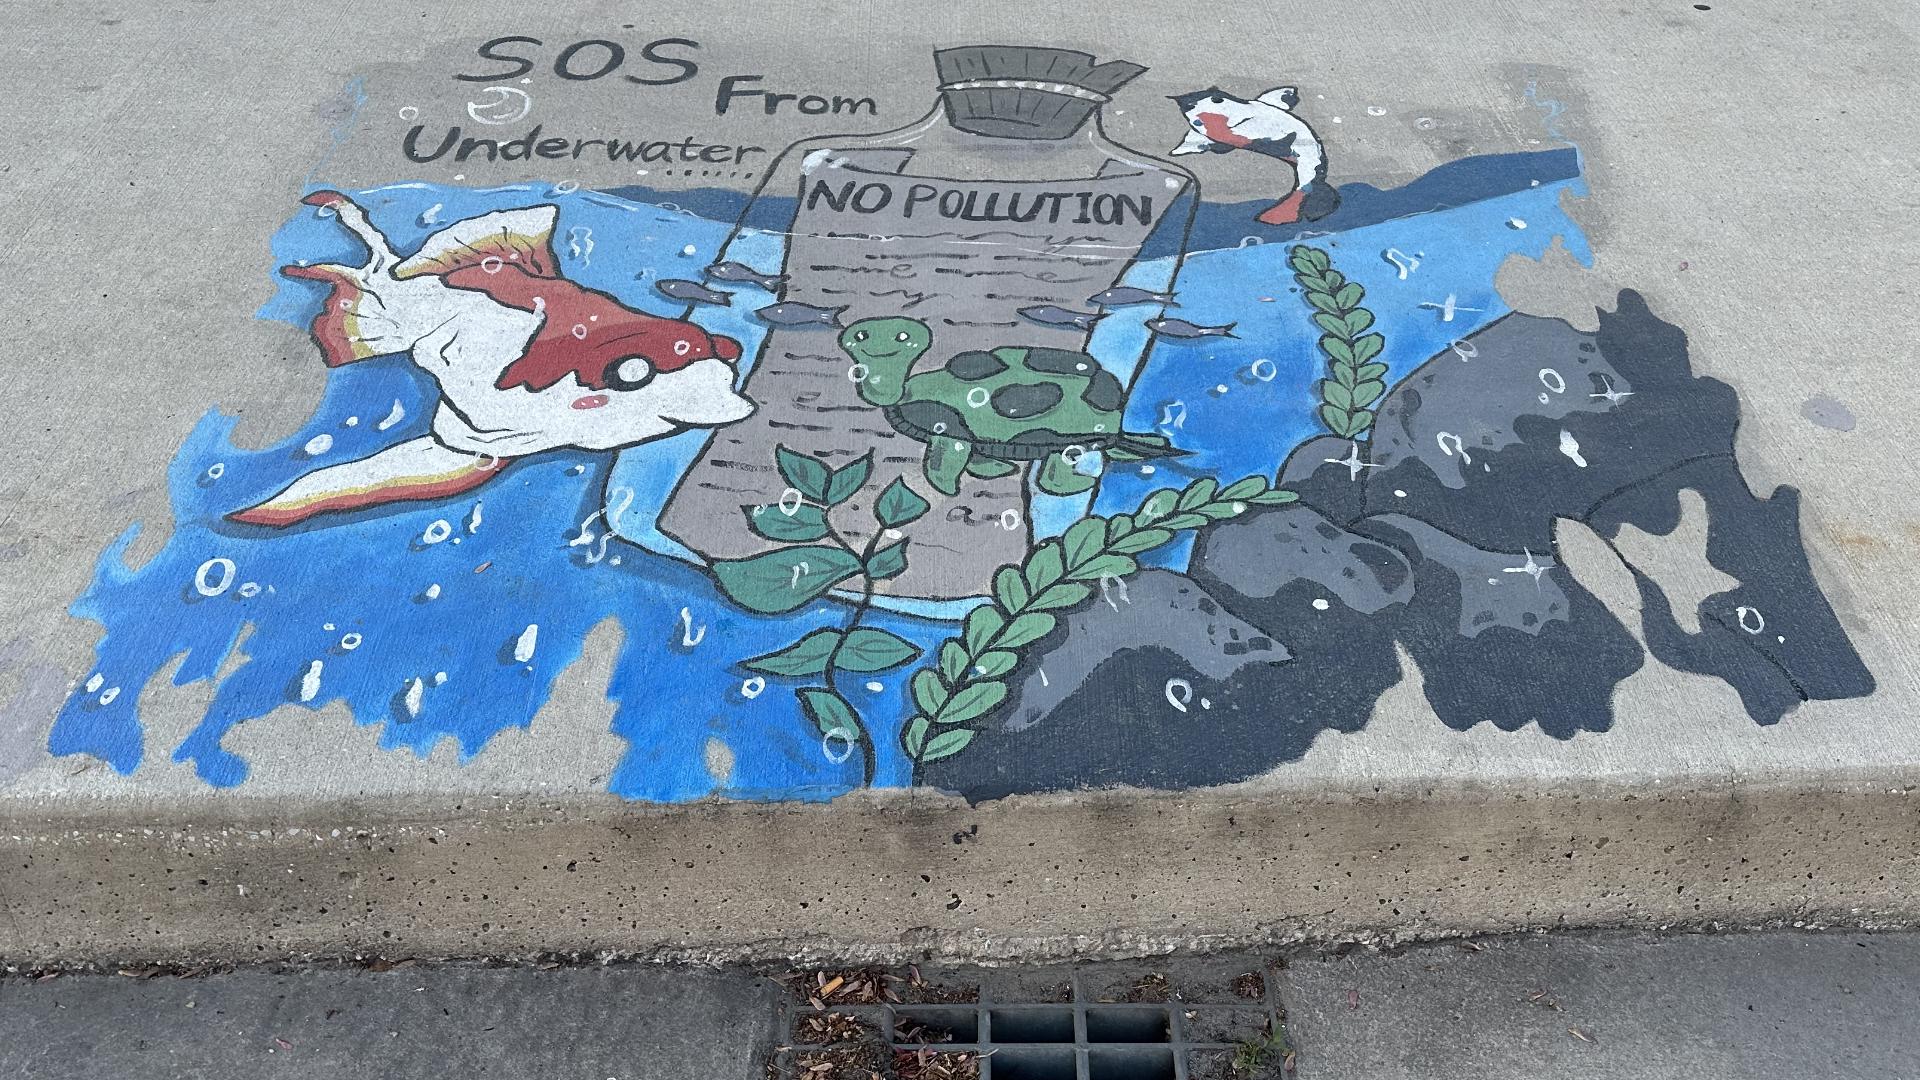 Organizers say this is an attempt to raise citizen awareness and help educate the York community about the connection between storm drains and local creeks.